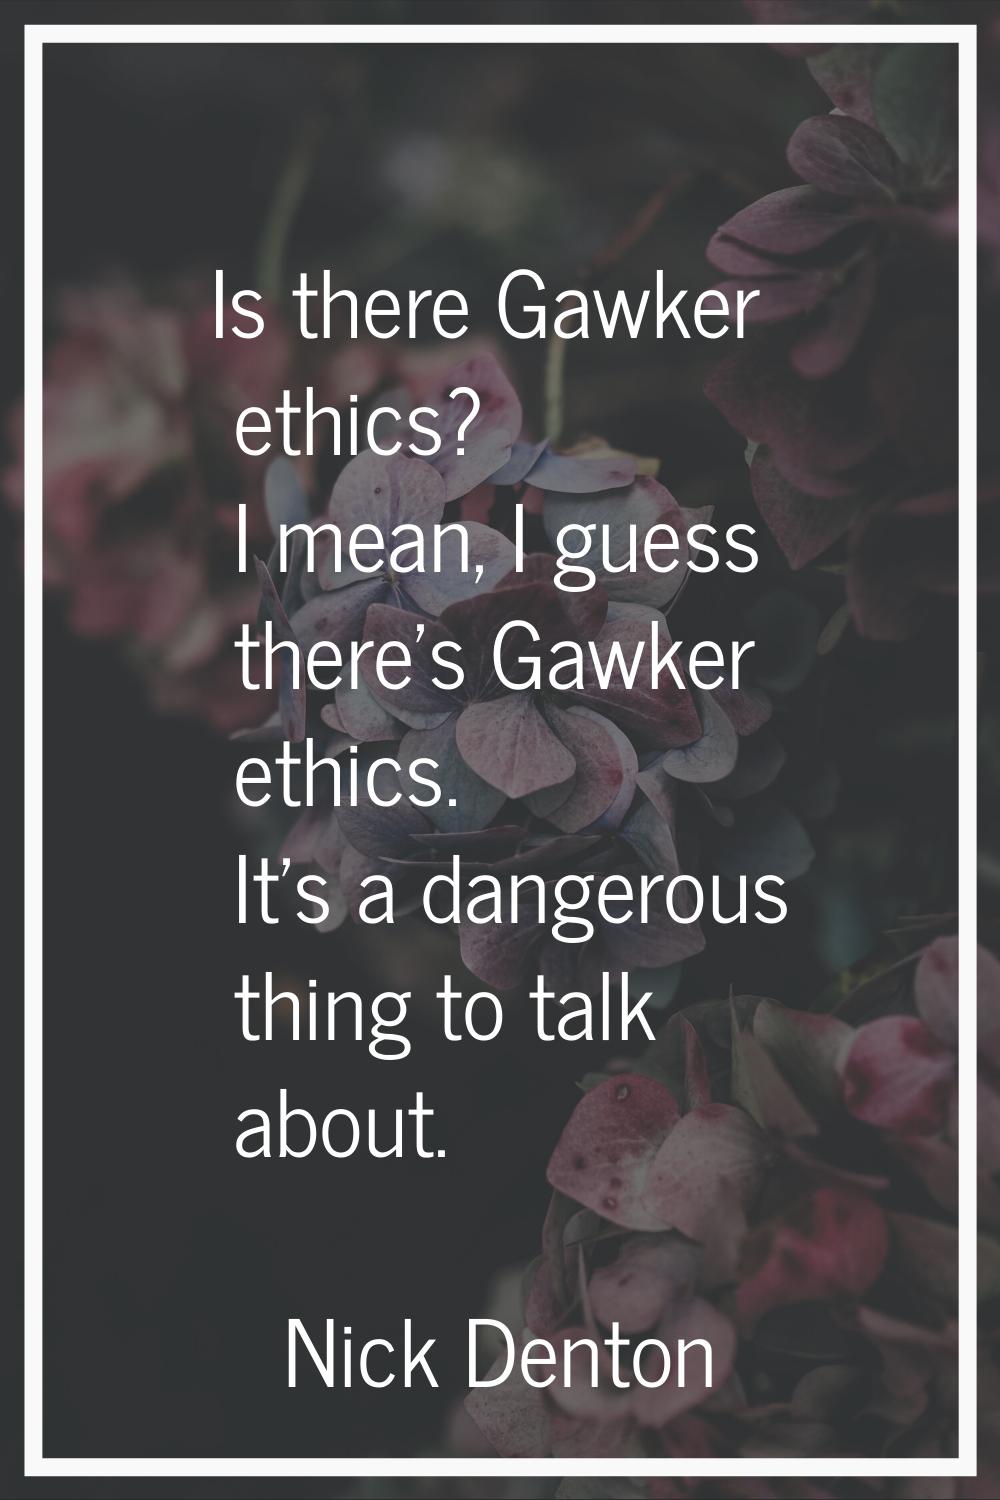 Is there Gawker ethics? I mean, I guess there's Gawker ethics. It's a dangerous thing to talk about